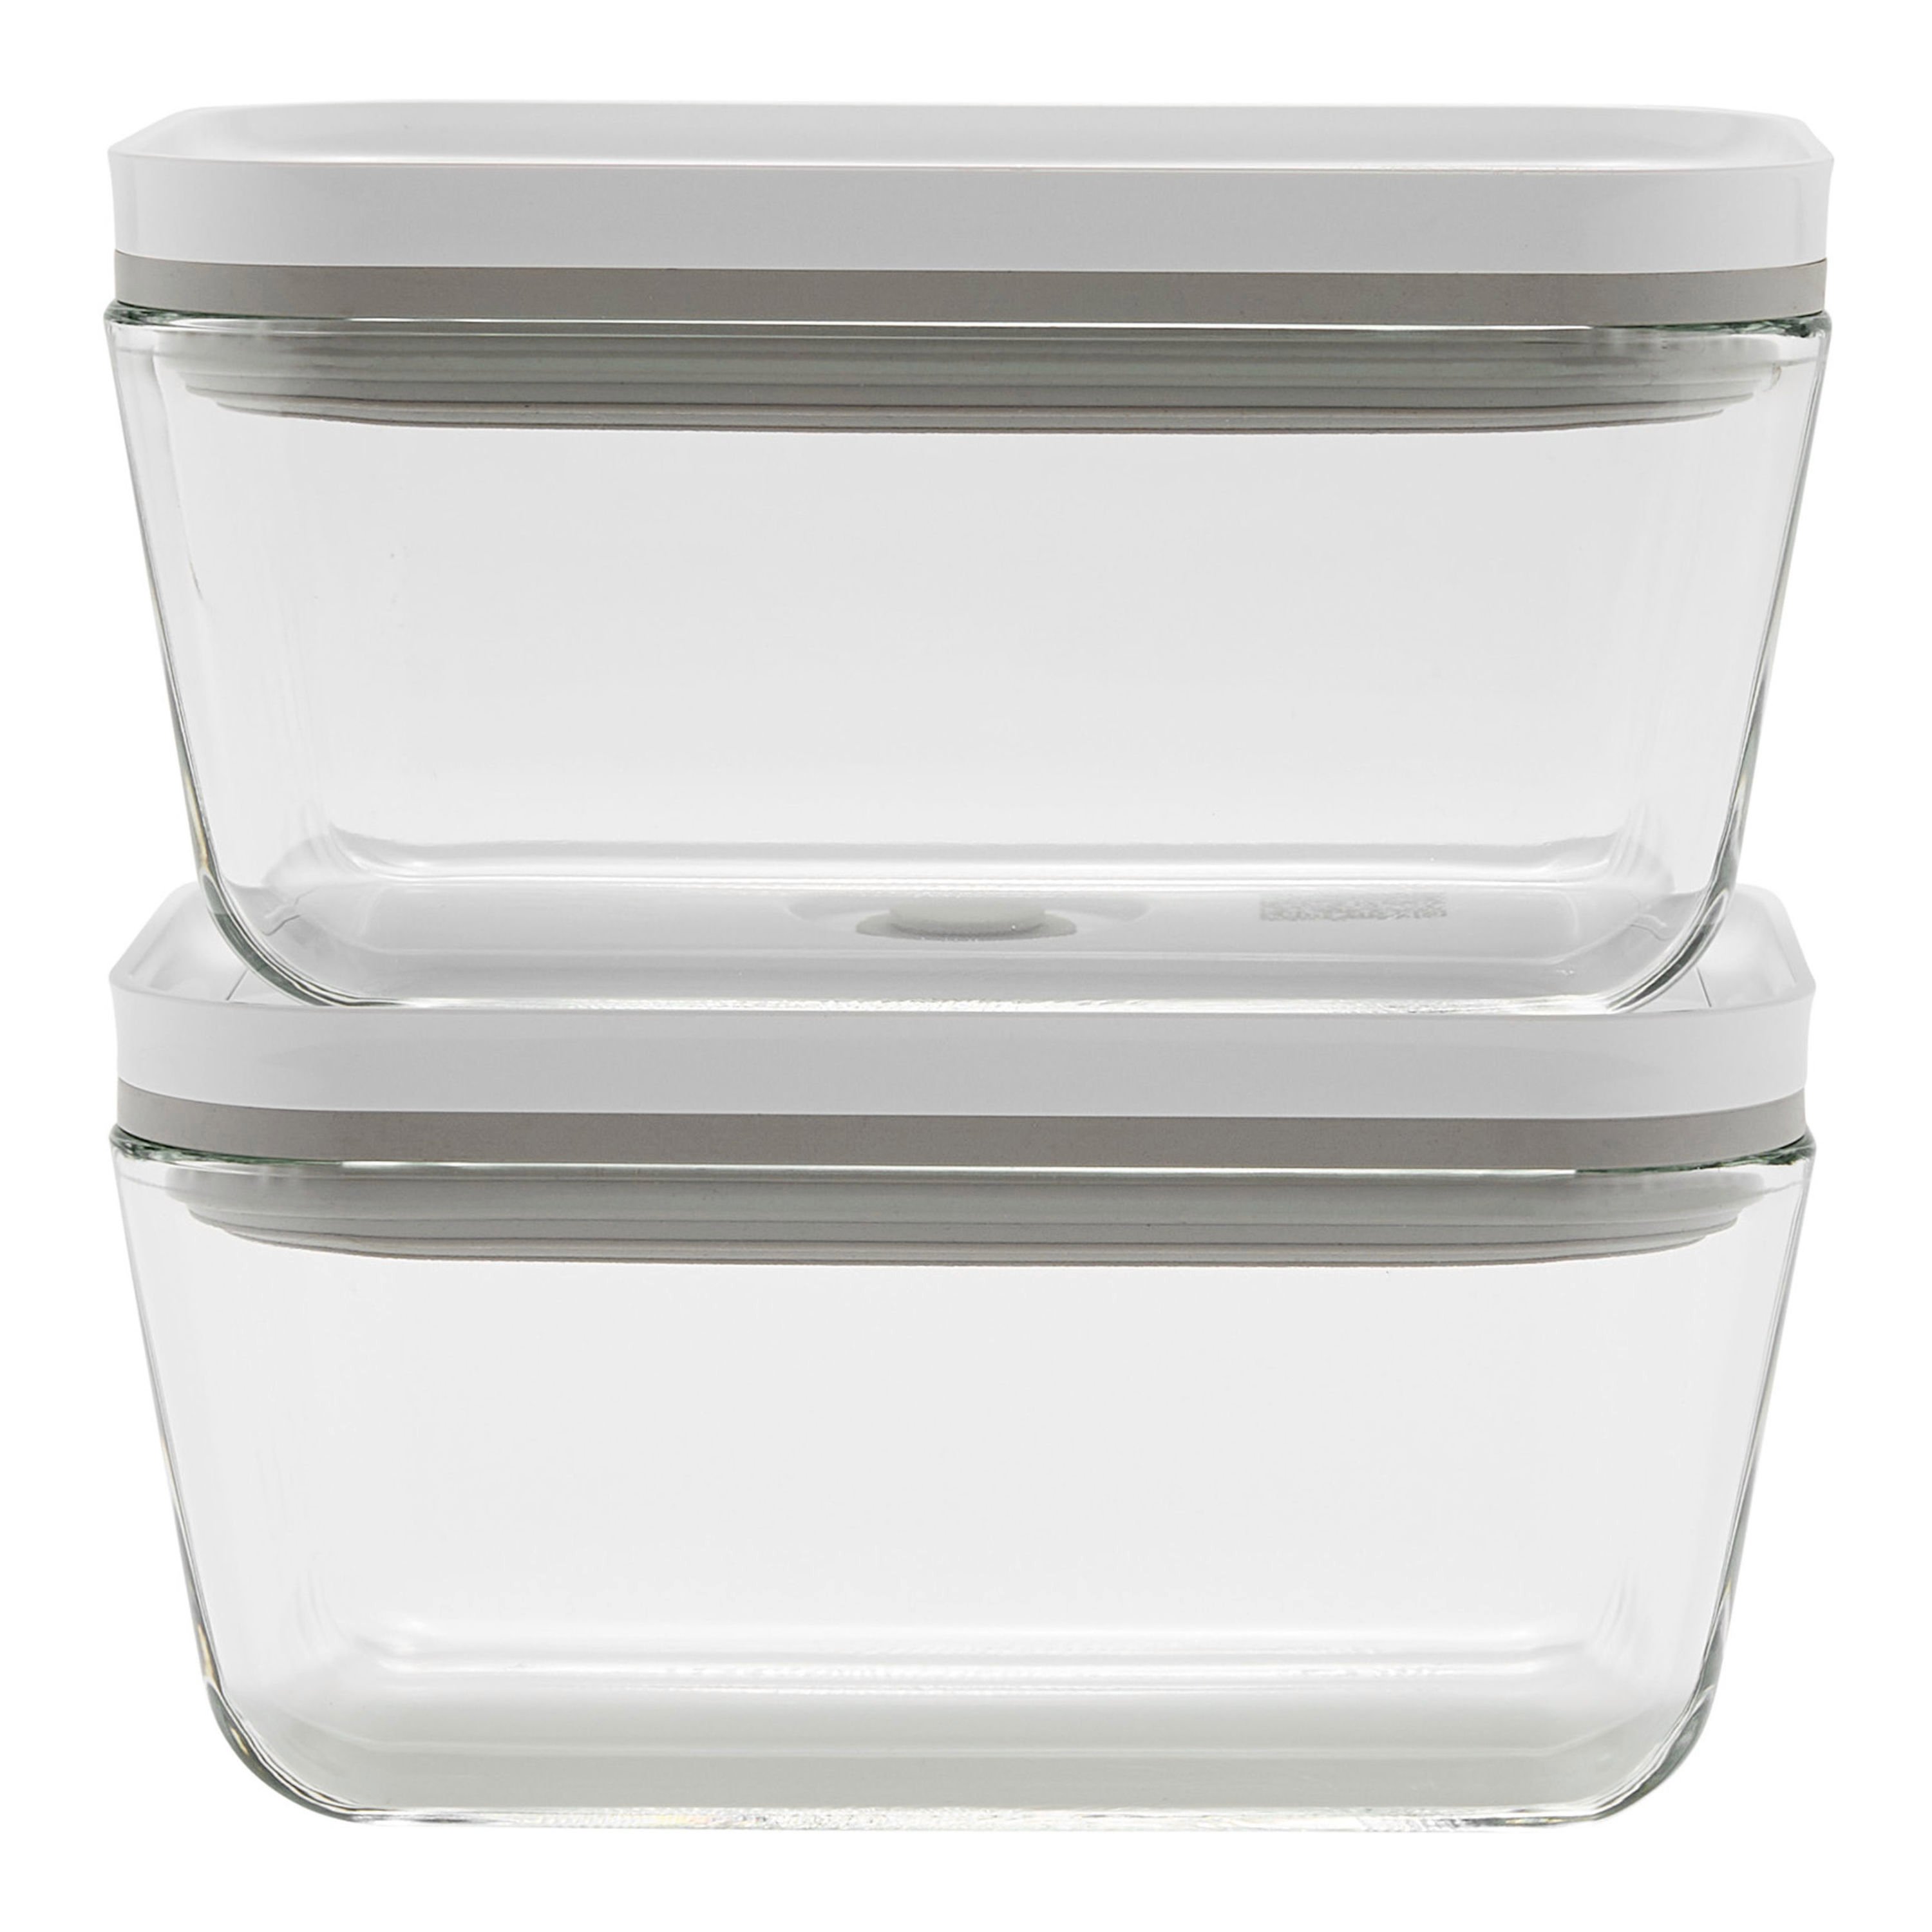  ZWILLING Fresh & Save 2-Piece Small Glass Airtight